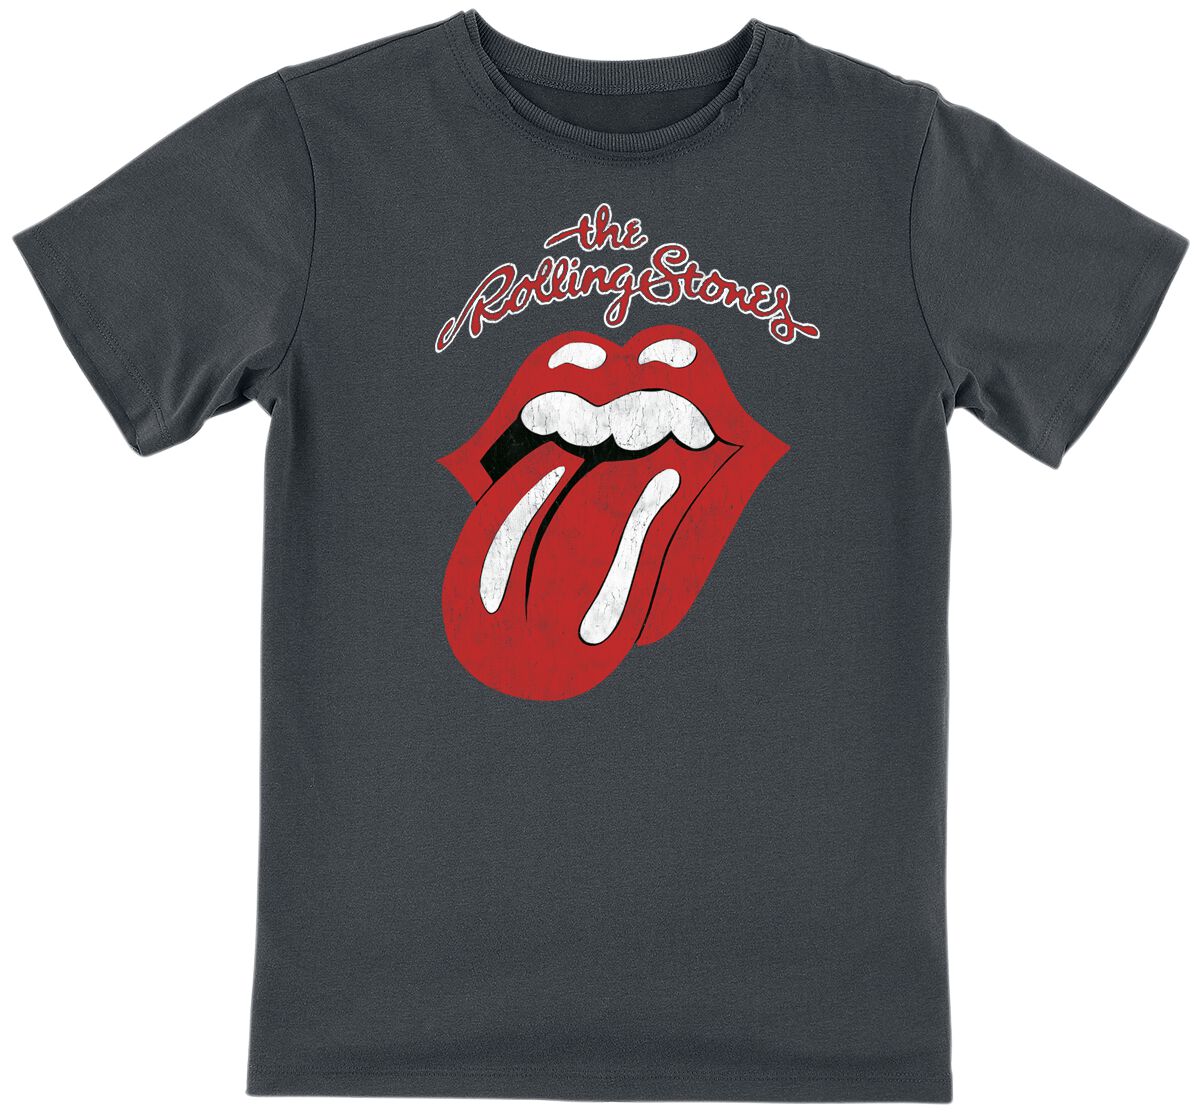 The Rolling Stones Amplified Collection - Square Tongue T-Shirt charcoal in 92